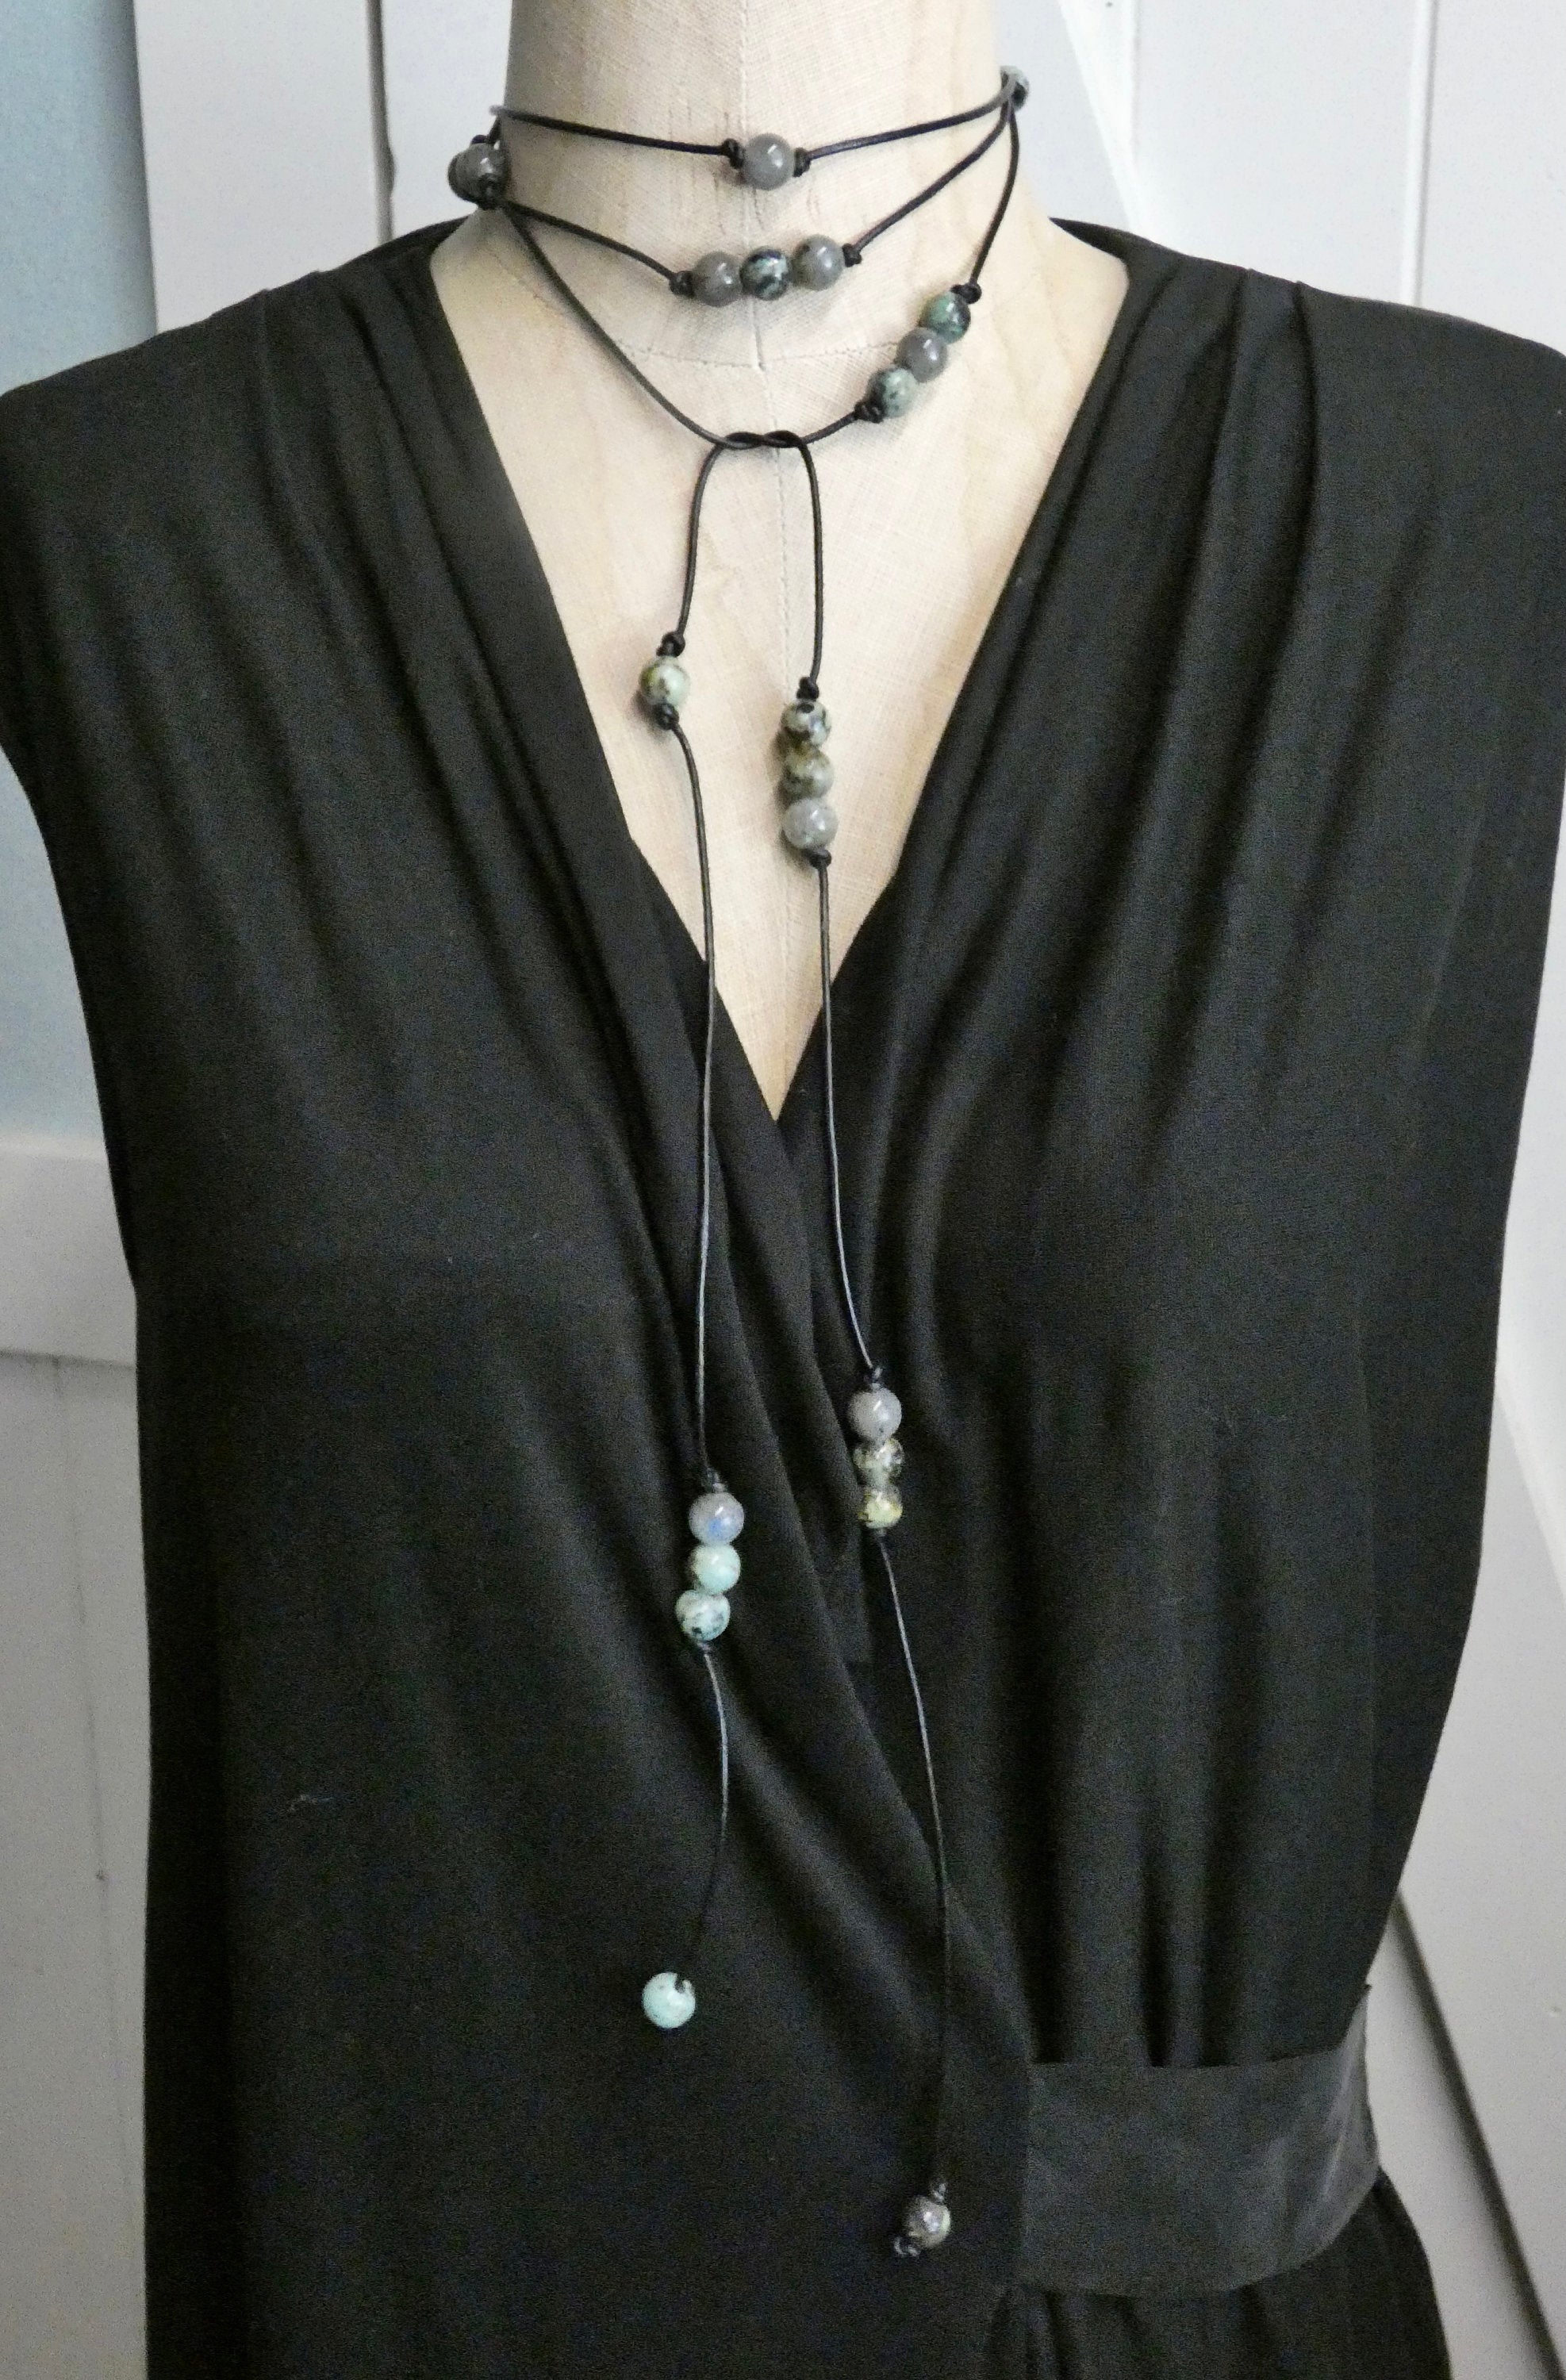 Handmade Leather and Turquoise Lariat Bohemian Necklace